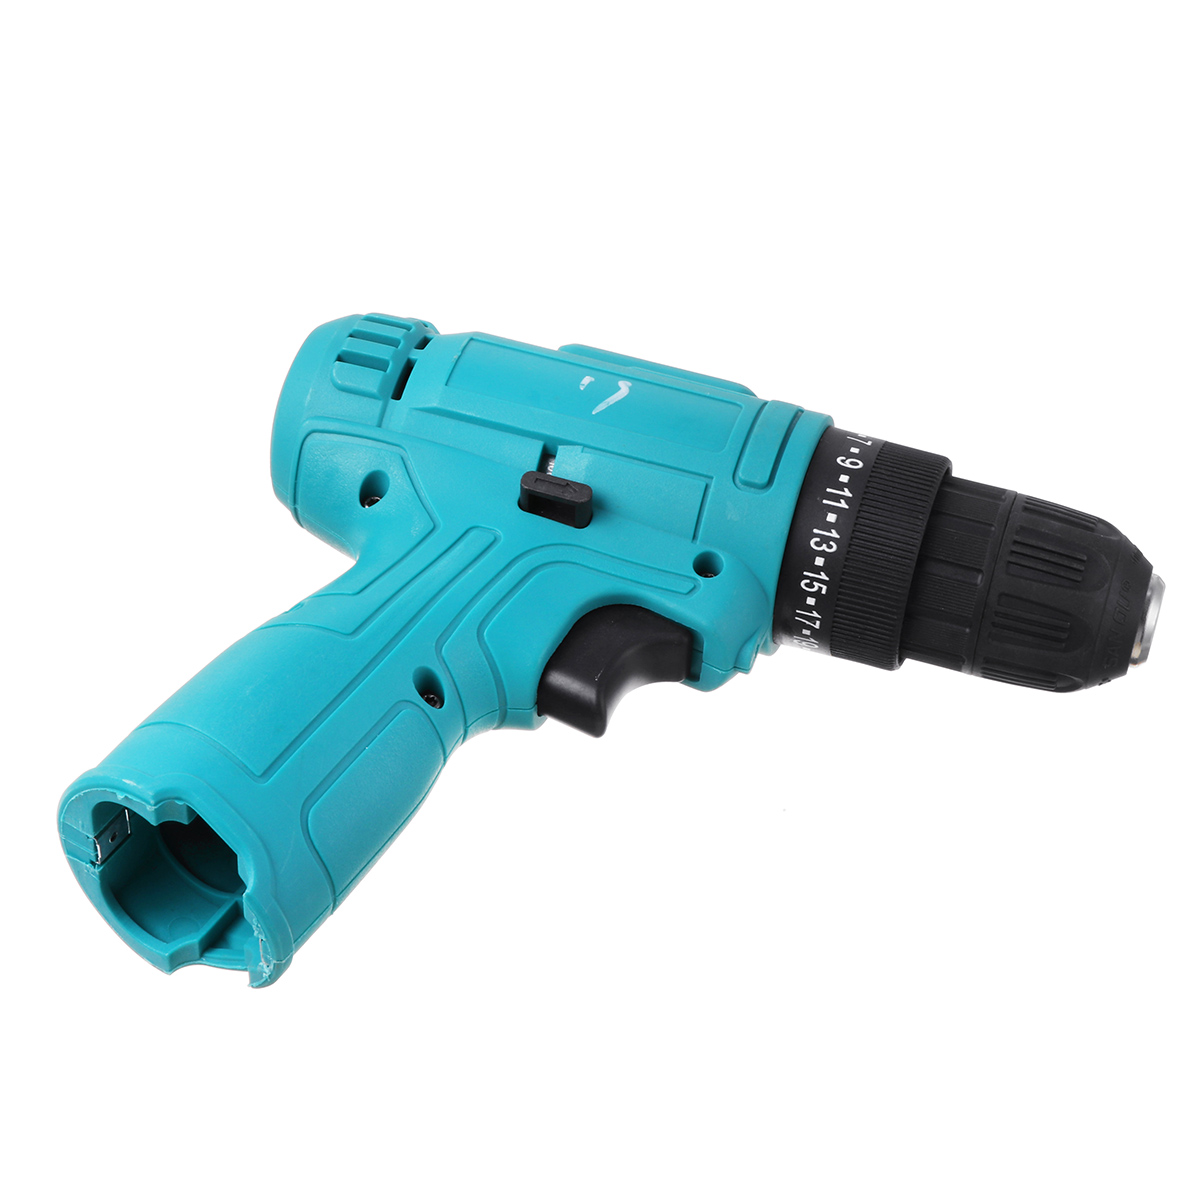 12V-25-Torque-2-Speed-Cordless-Electric-Drill-Rechargeable-Screwdriver-Without-Battery-1745656-6